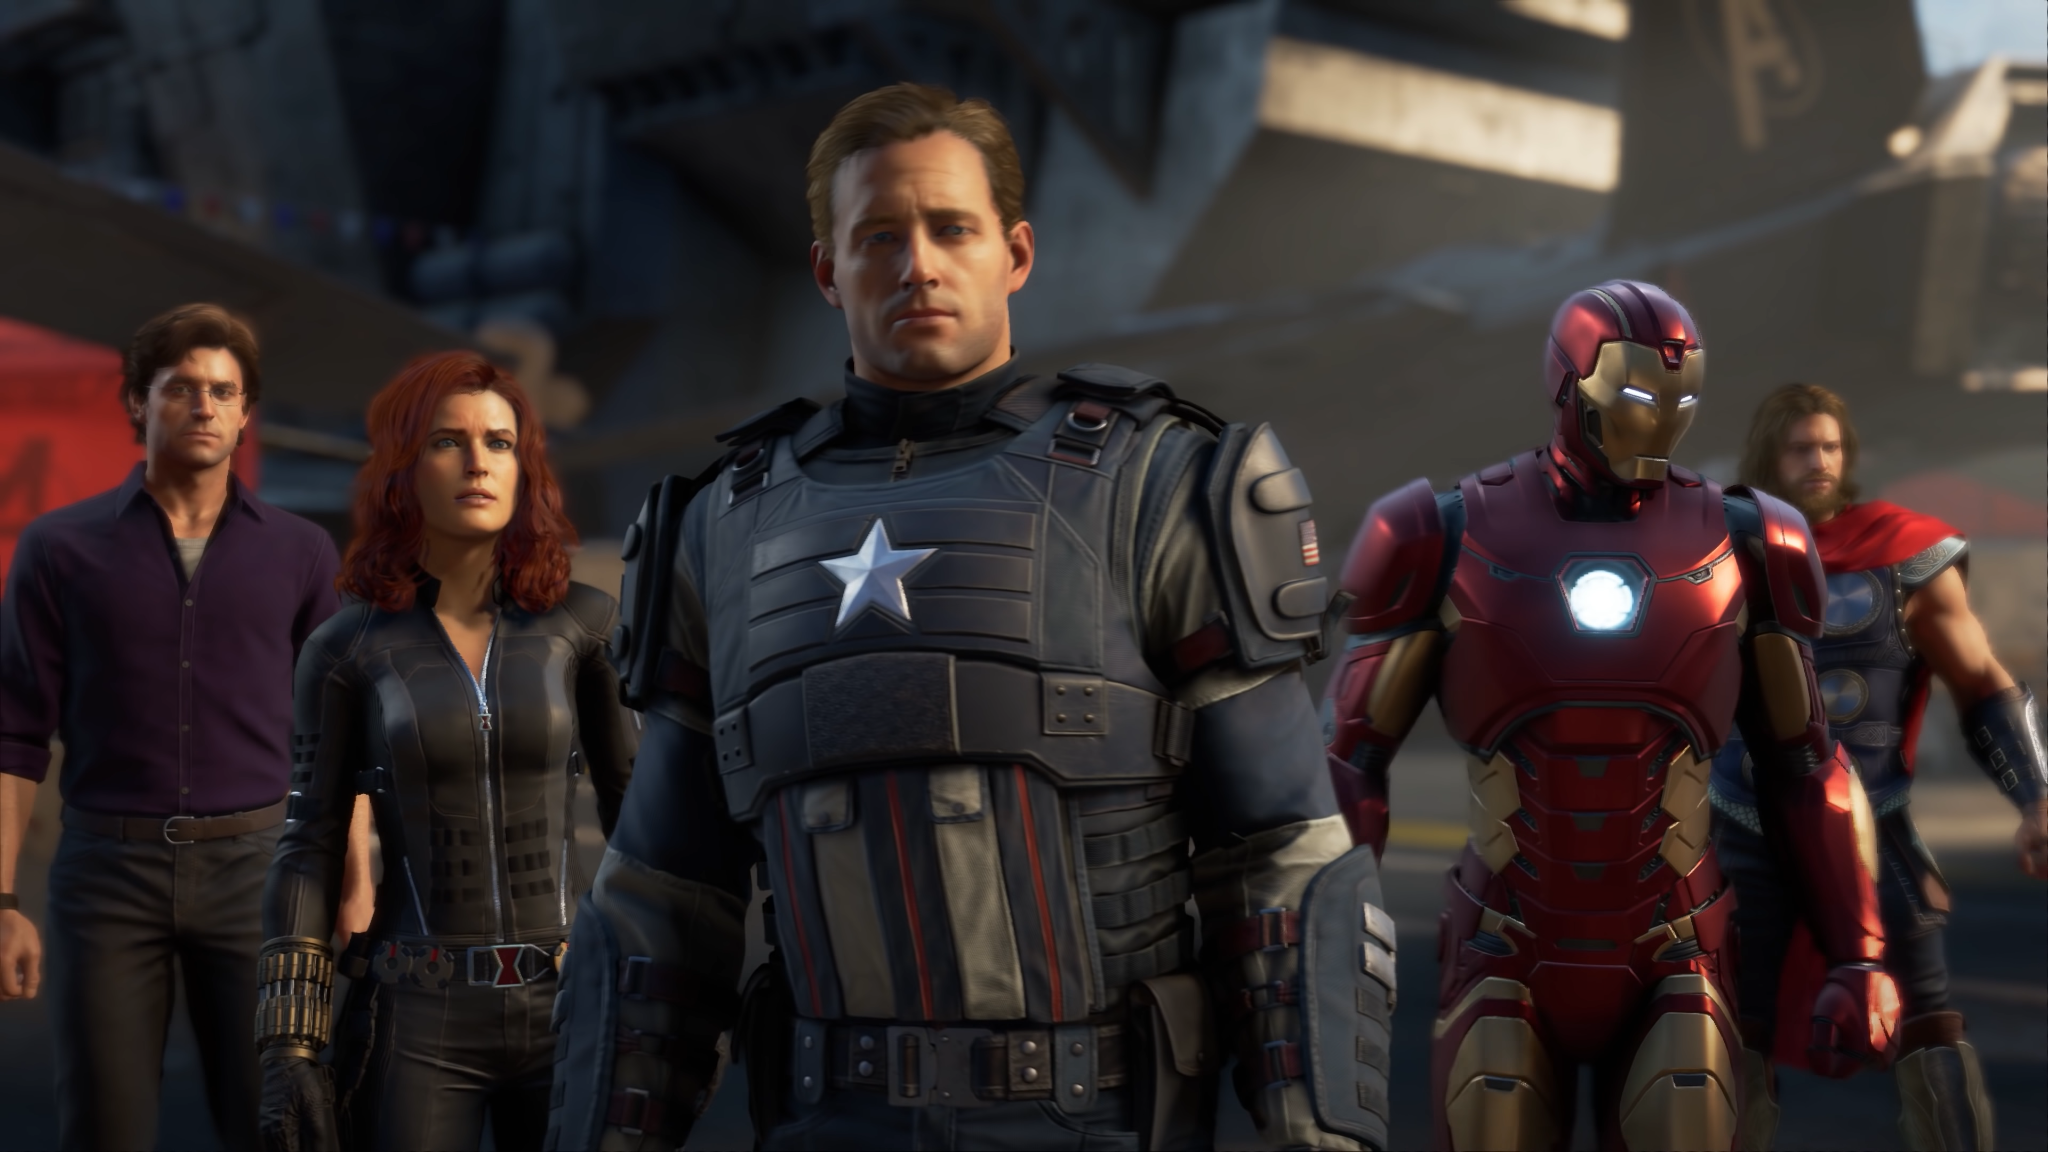 They look a little different from the Avengers we know. But hey, the faces of Chris Evans and Scarlett Johanson aren’t exactly cheap. (Picture: Square Enix)